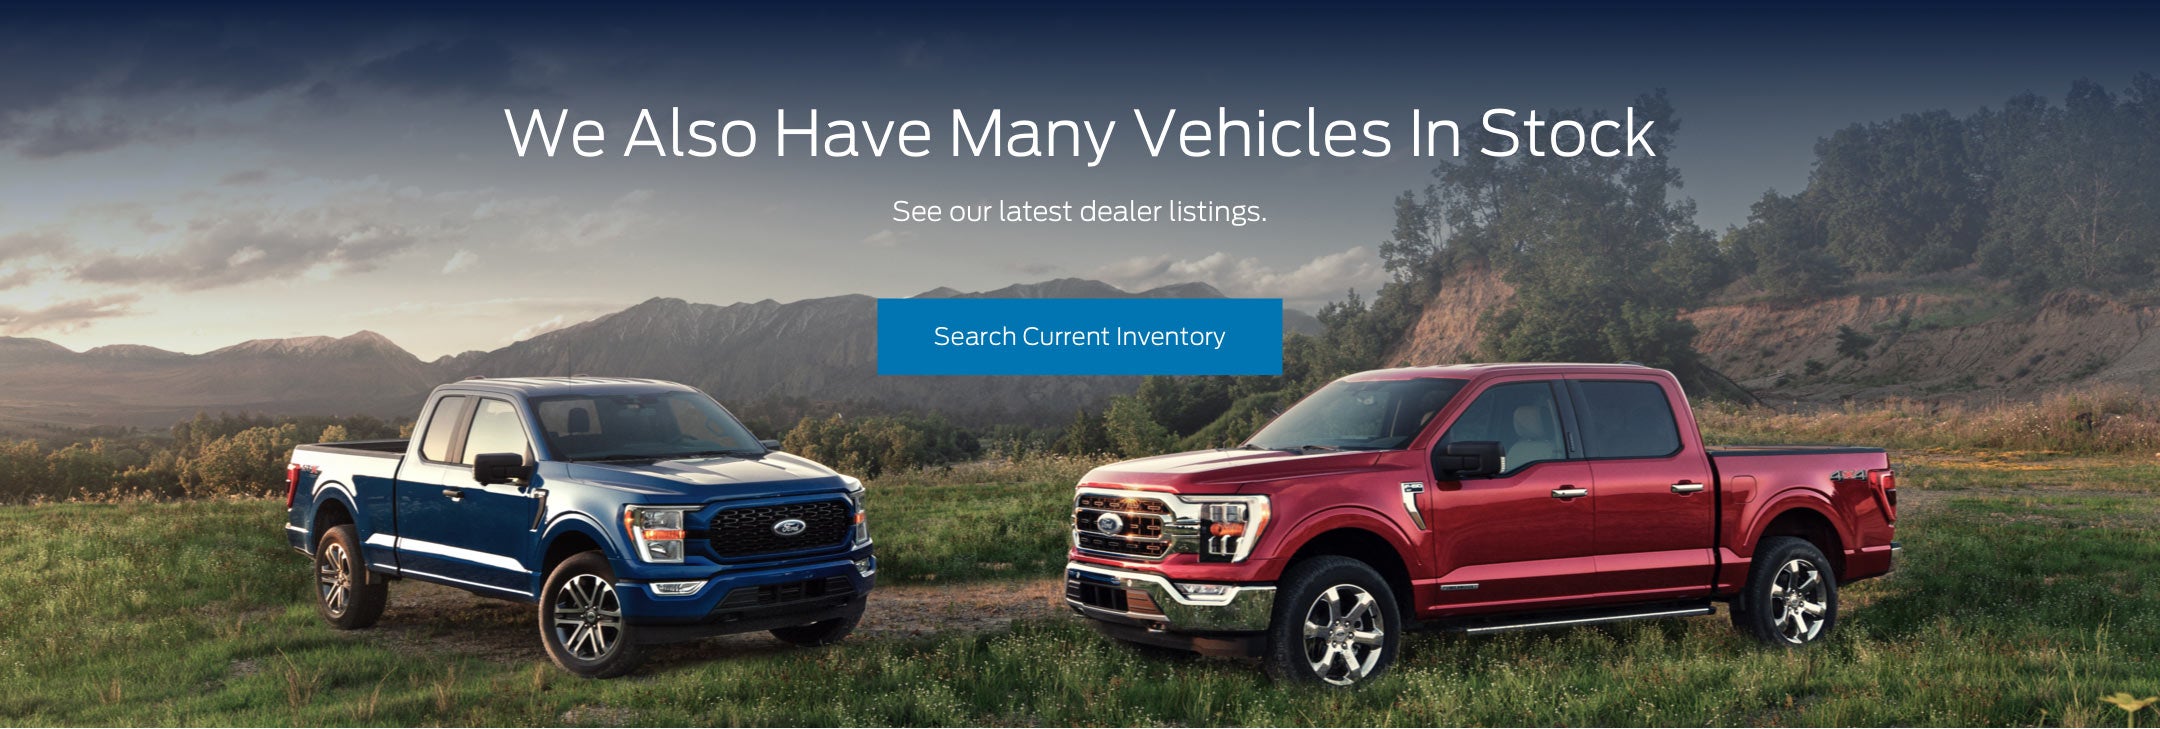 Ford vehicles in stock | Jones Ford in North Charleston SC